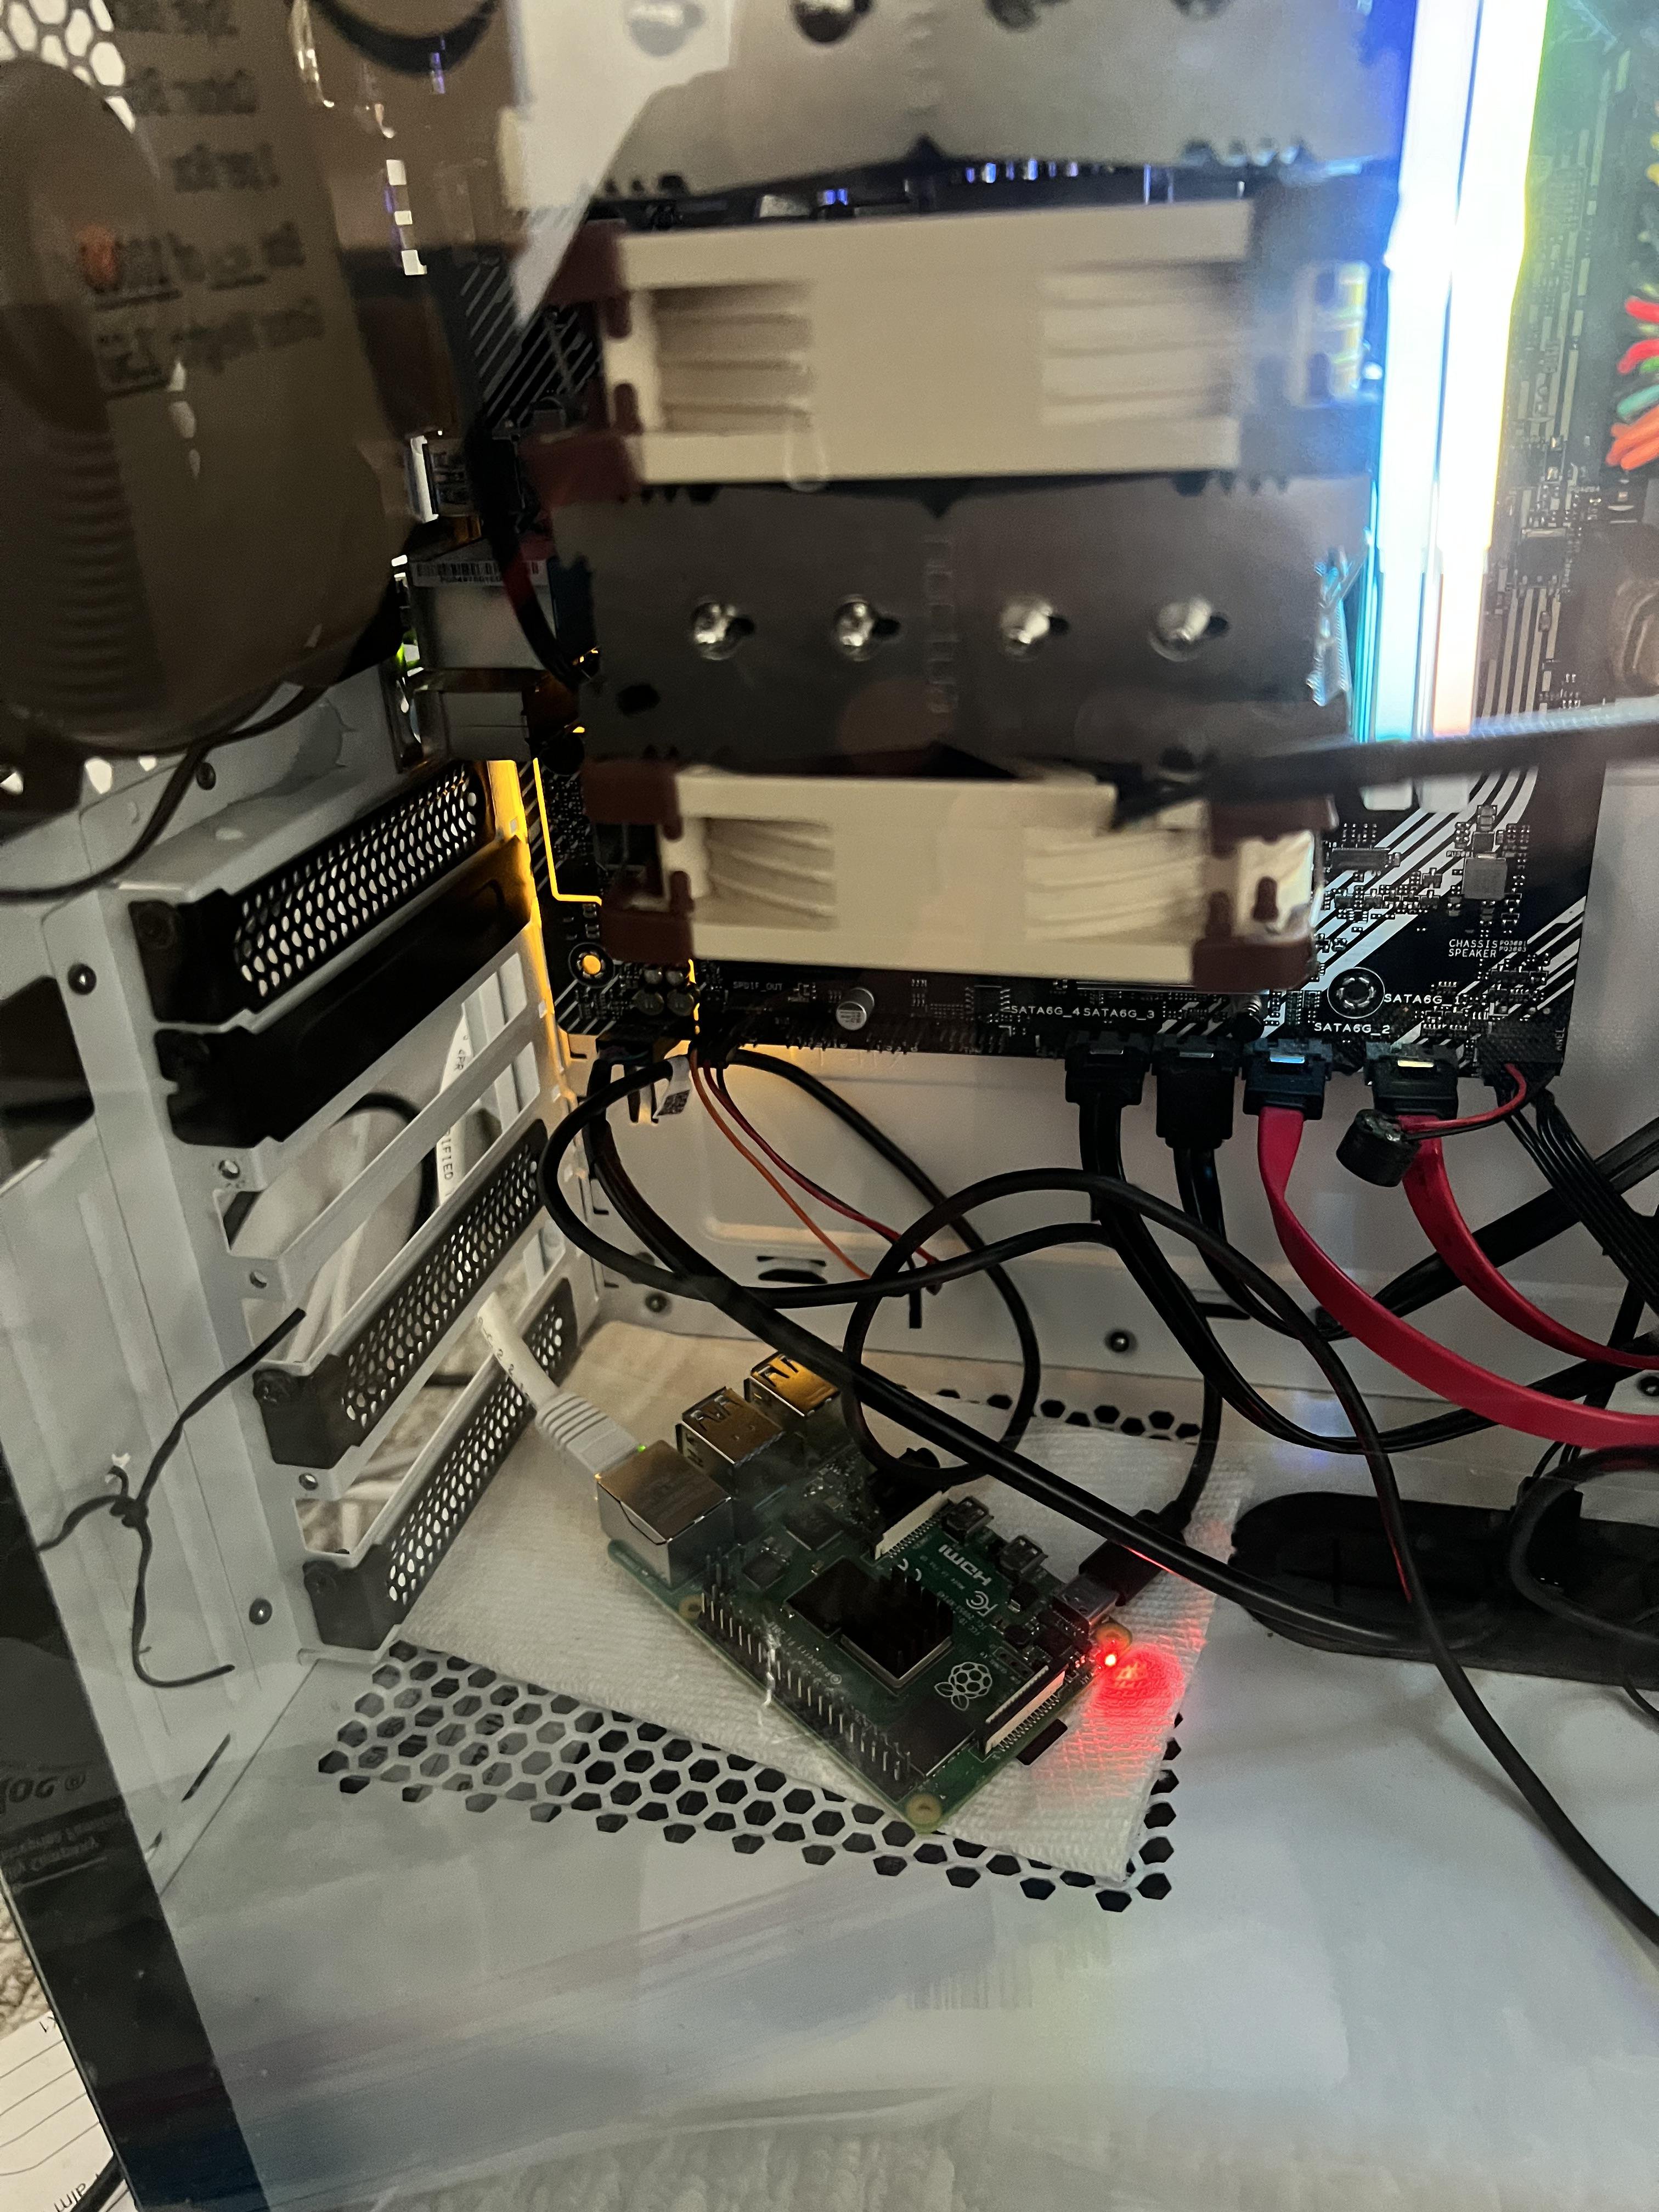 A picture of pneuma, my main shellbox node, with a Raspi 4B shown placed on top of a paper towel to shield from shorts against the aluminum frame of the case.